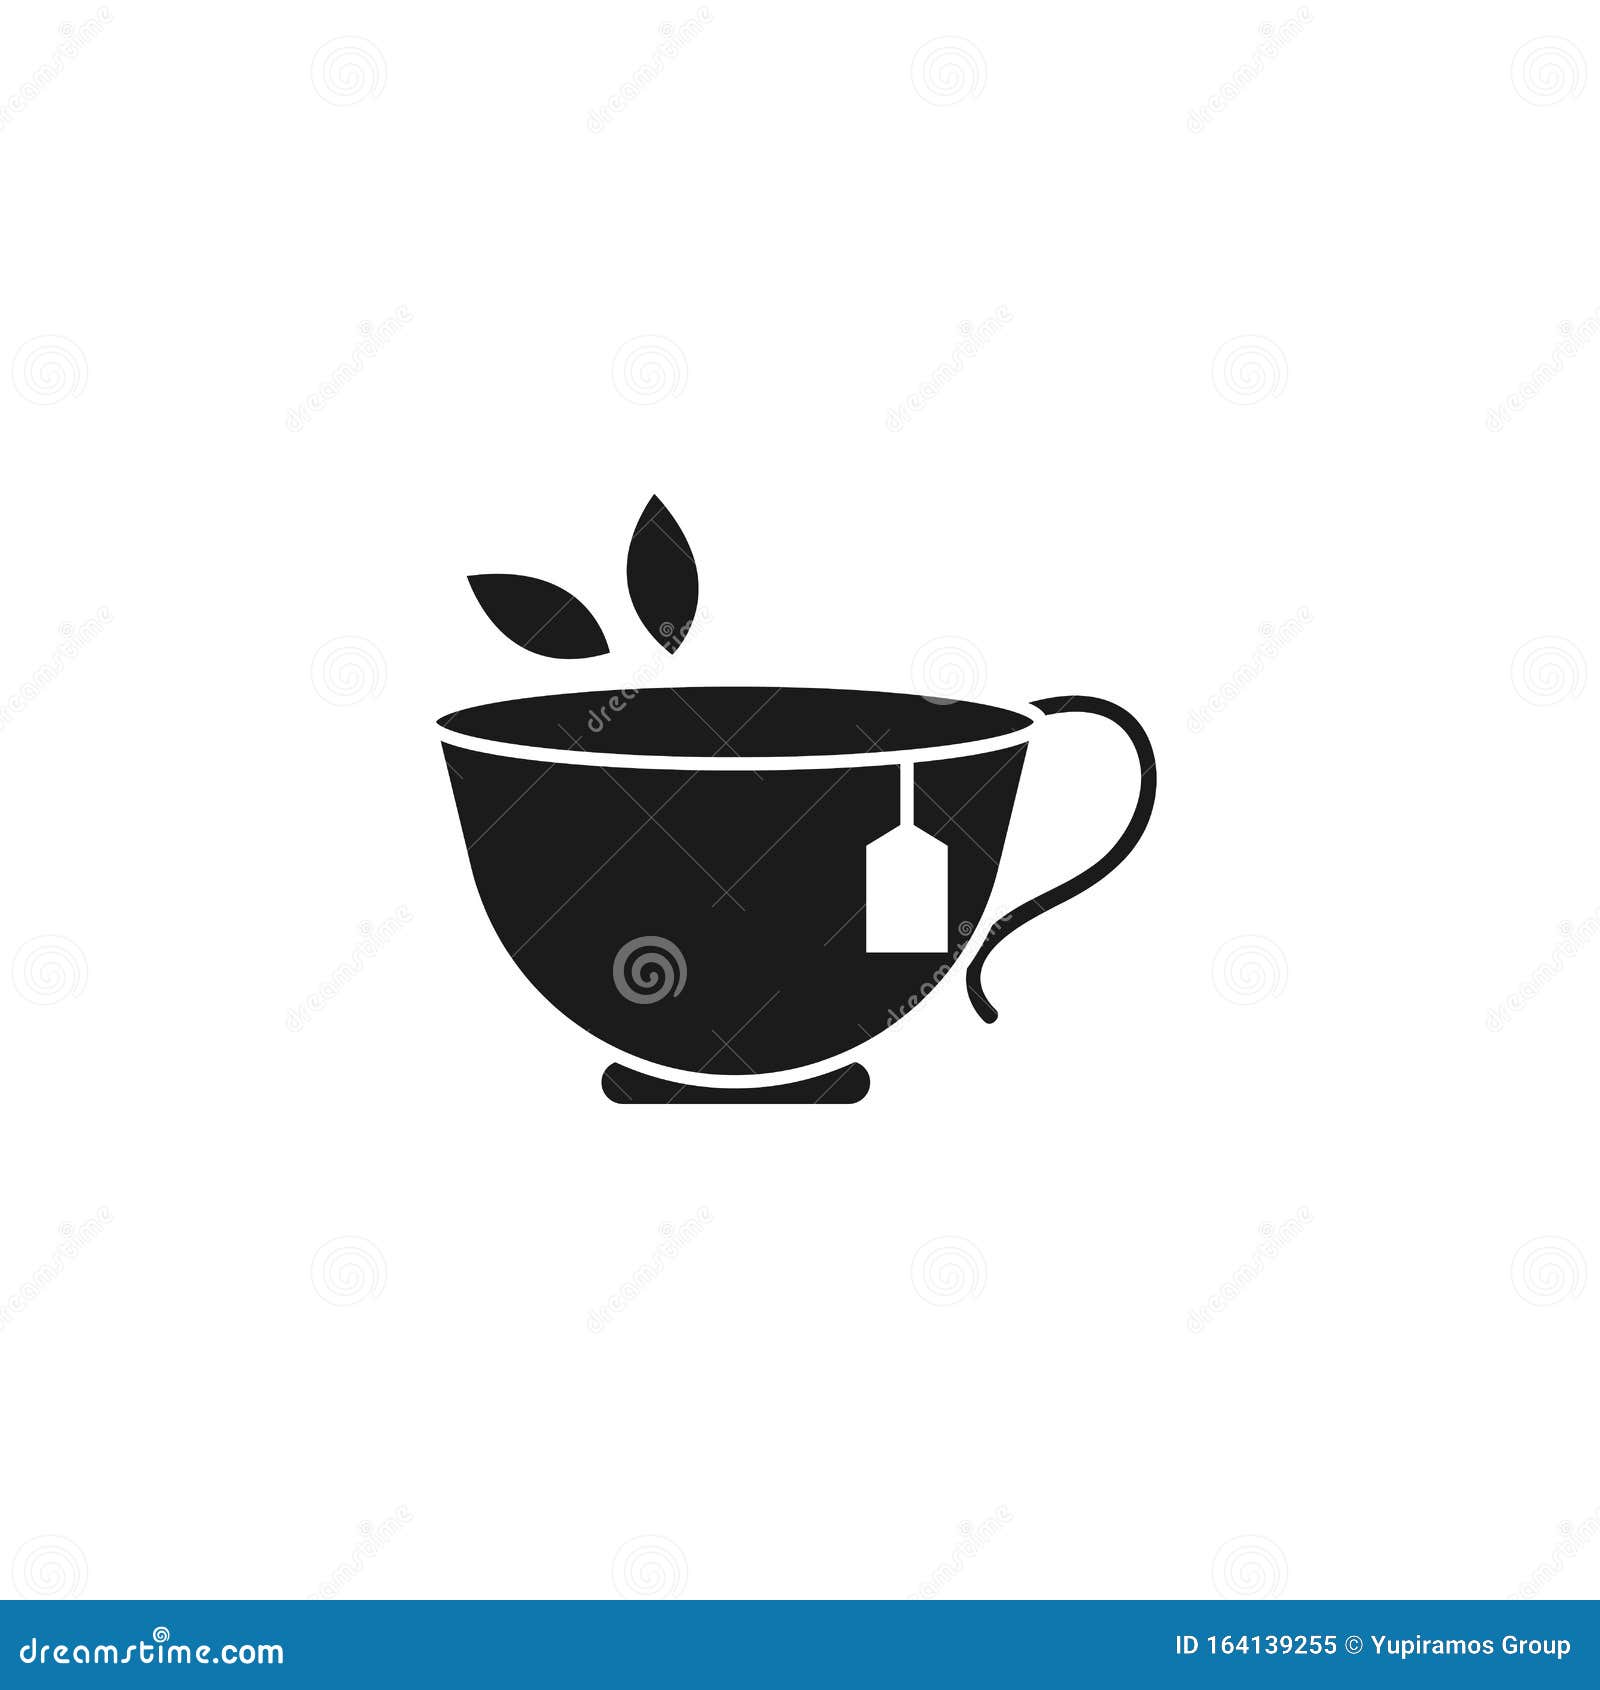 teacup spa silhouette style icon